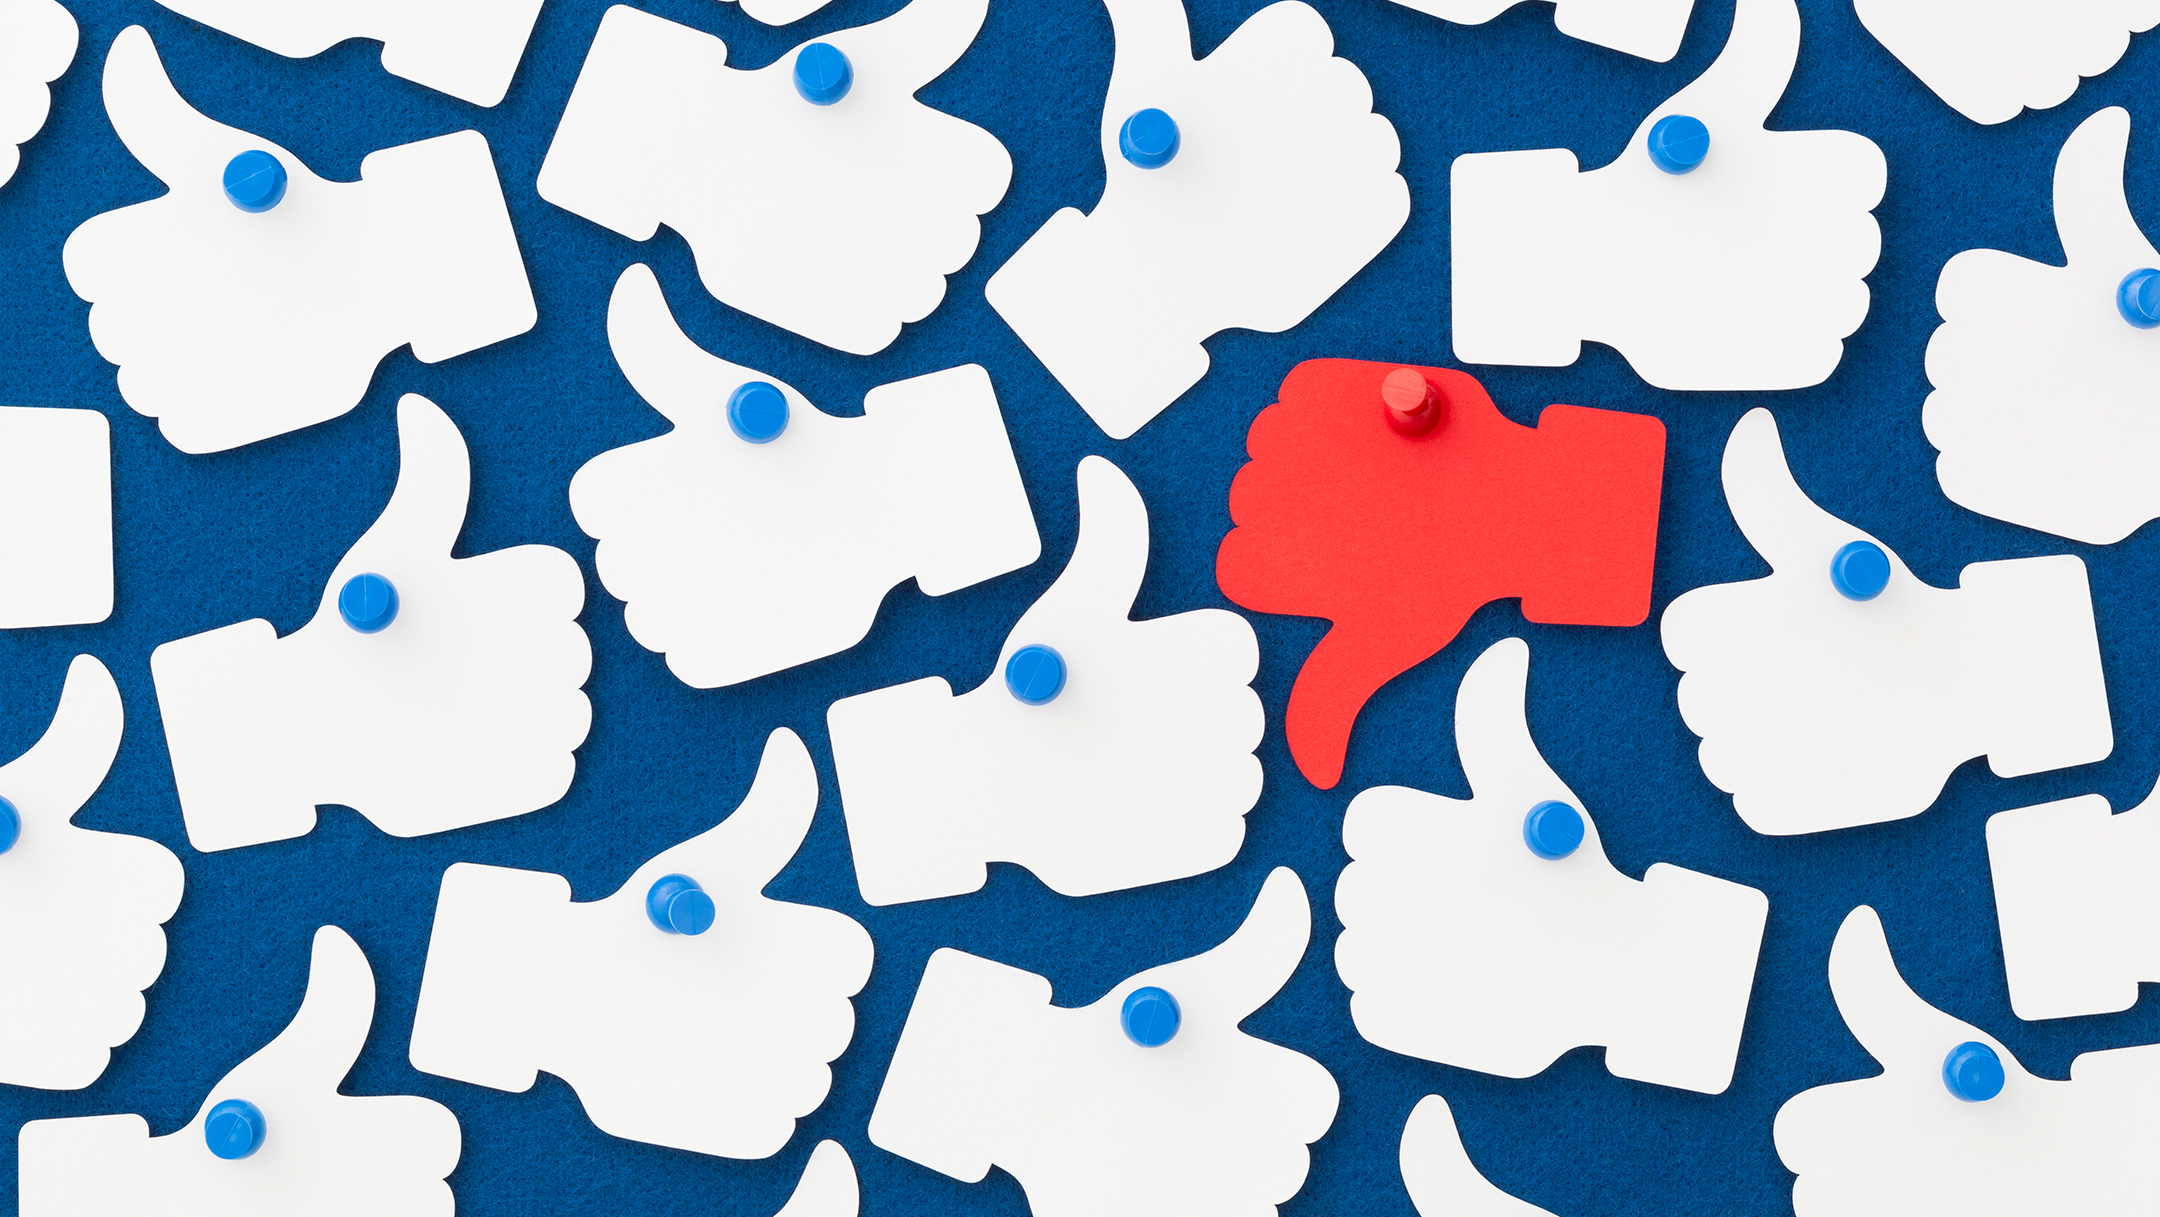 grouping of multiple white facebook thumbs up icons with one red thumbs down icon, all against a blue background